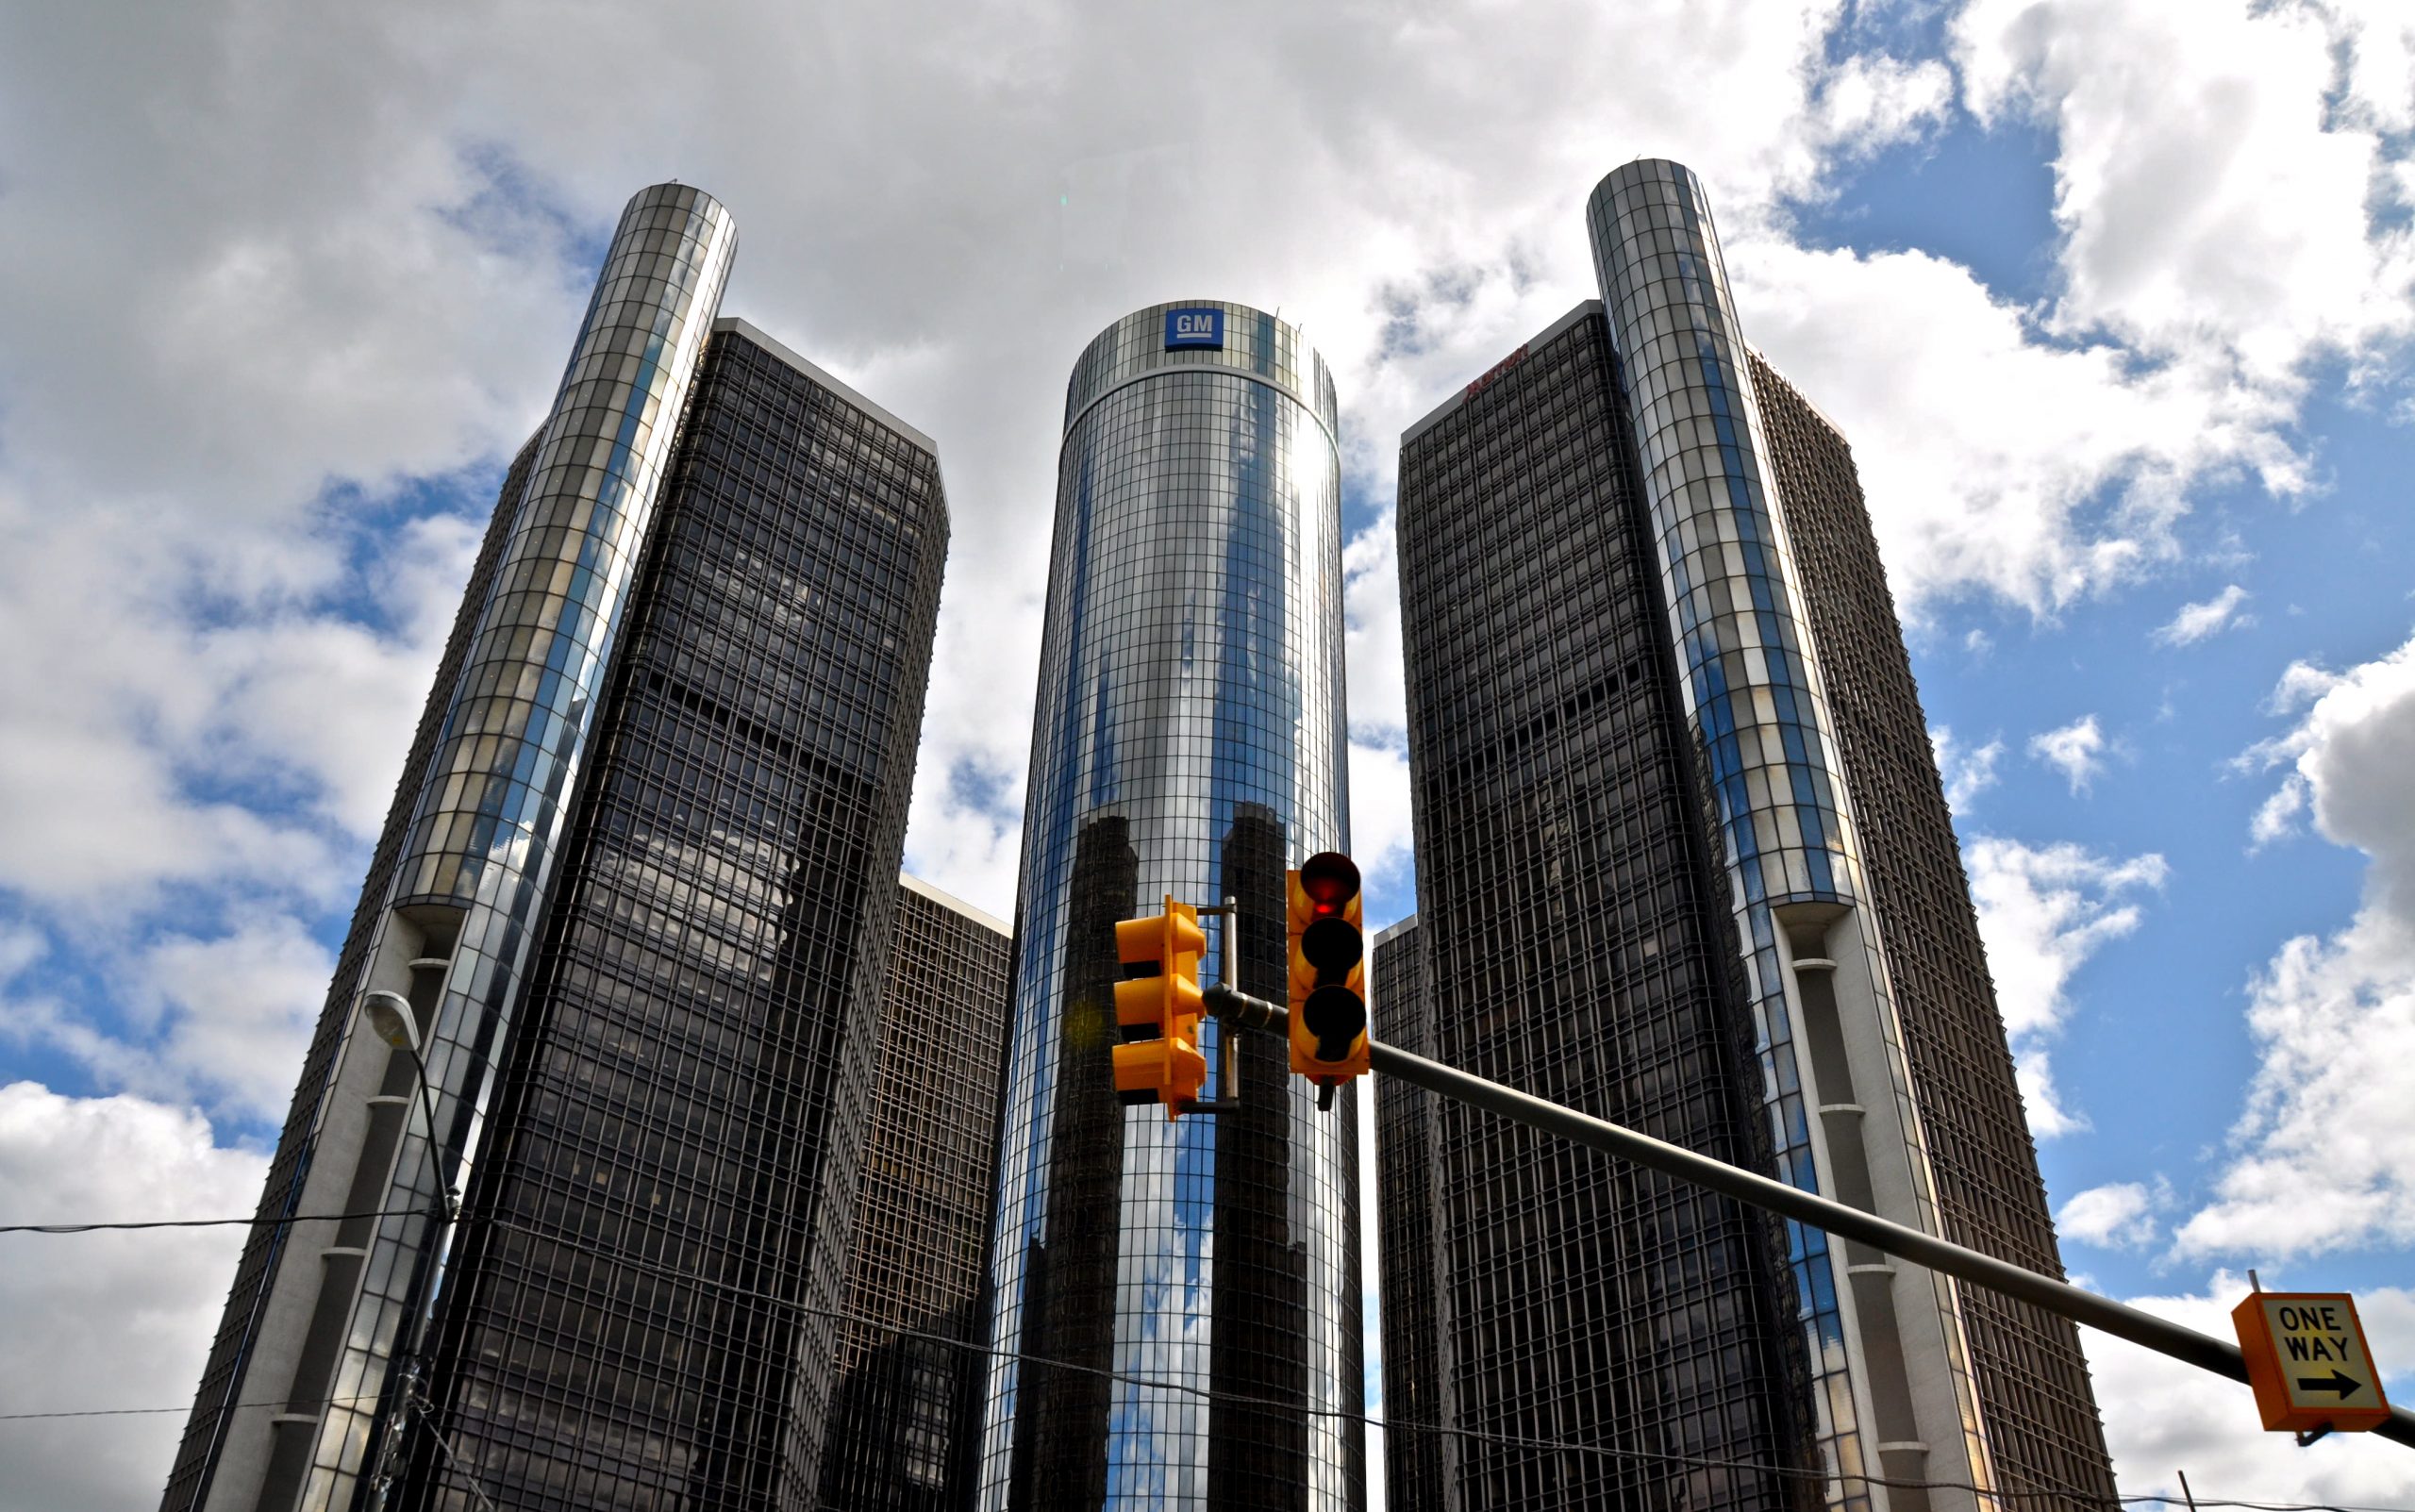 Modern skyscrapers with GM building under cloudy sky, traffic light in foreground.